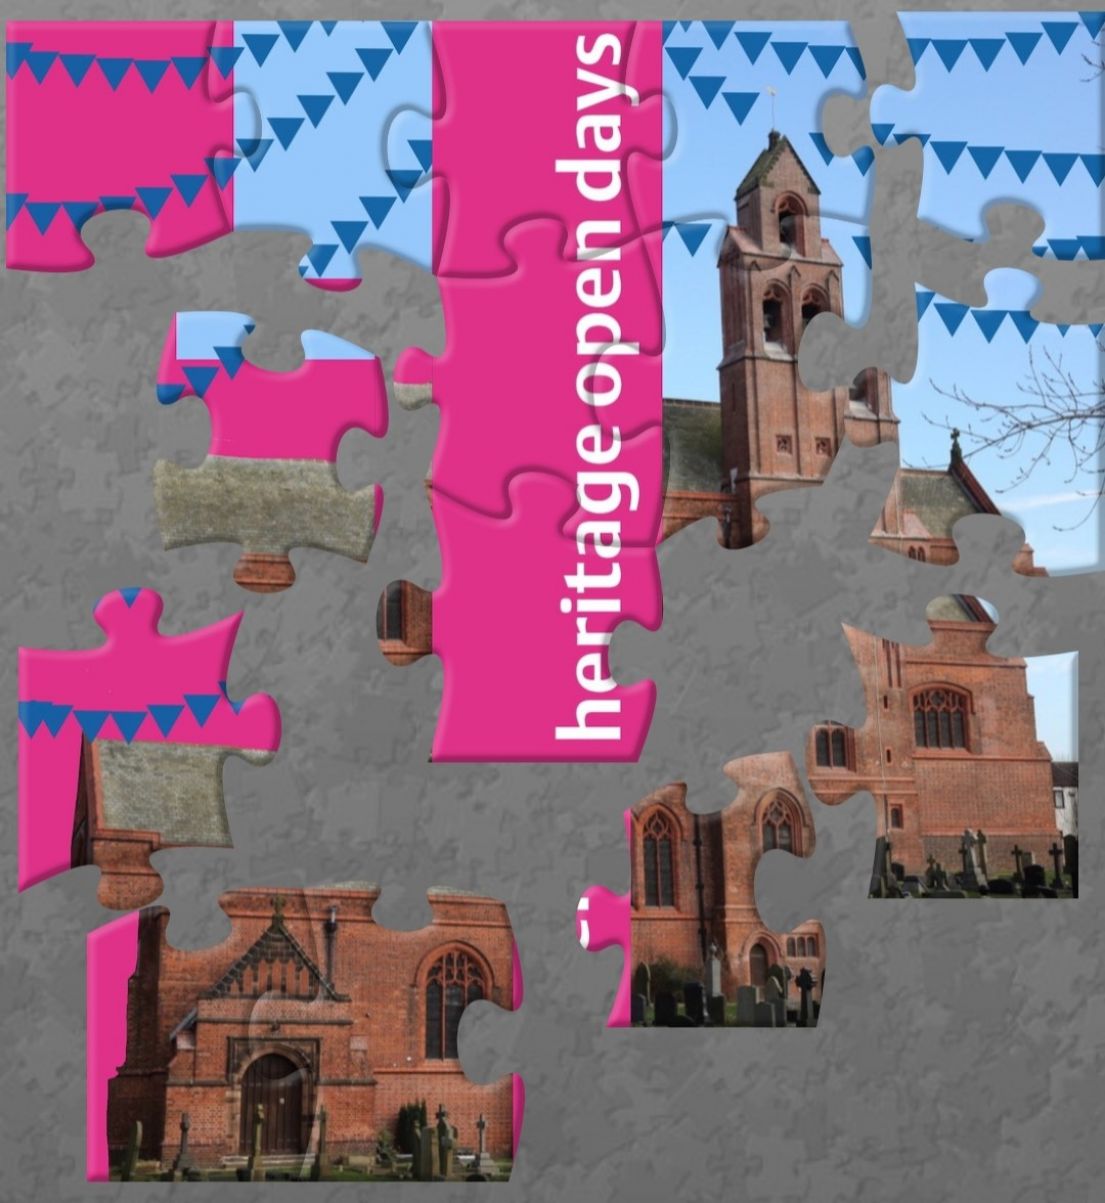 A partially completed puzzle, showing the image of of St James Church, bunting and the banner reading 'Heritage open Days'.